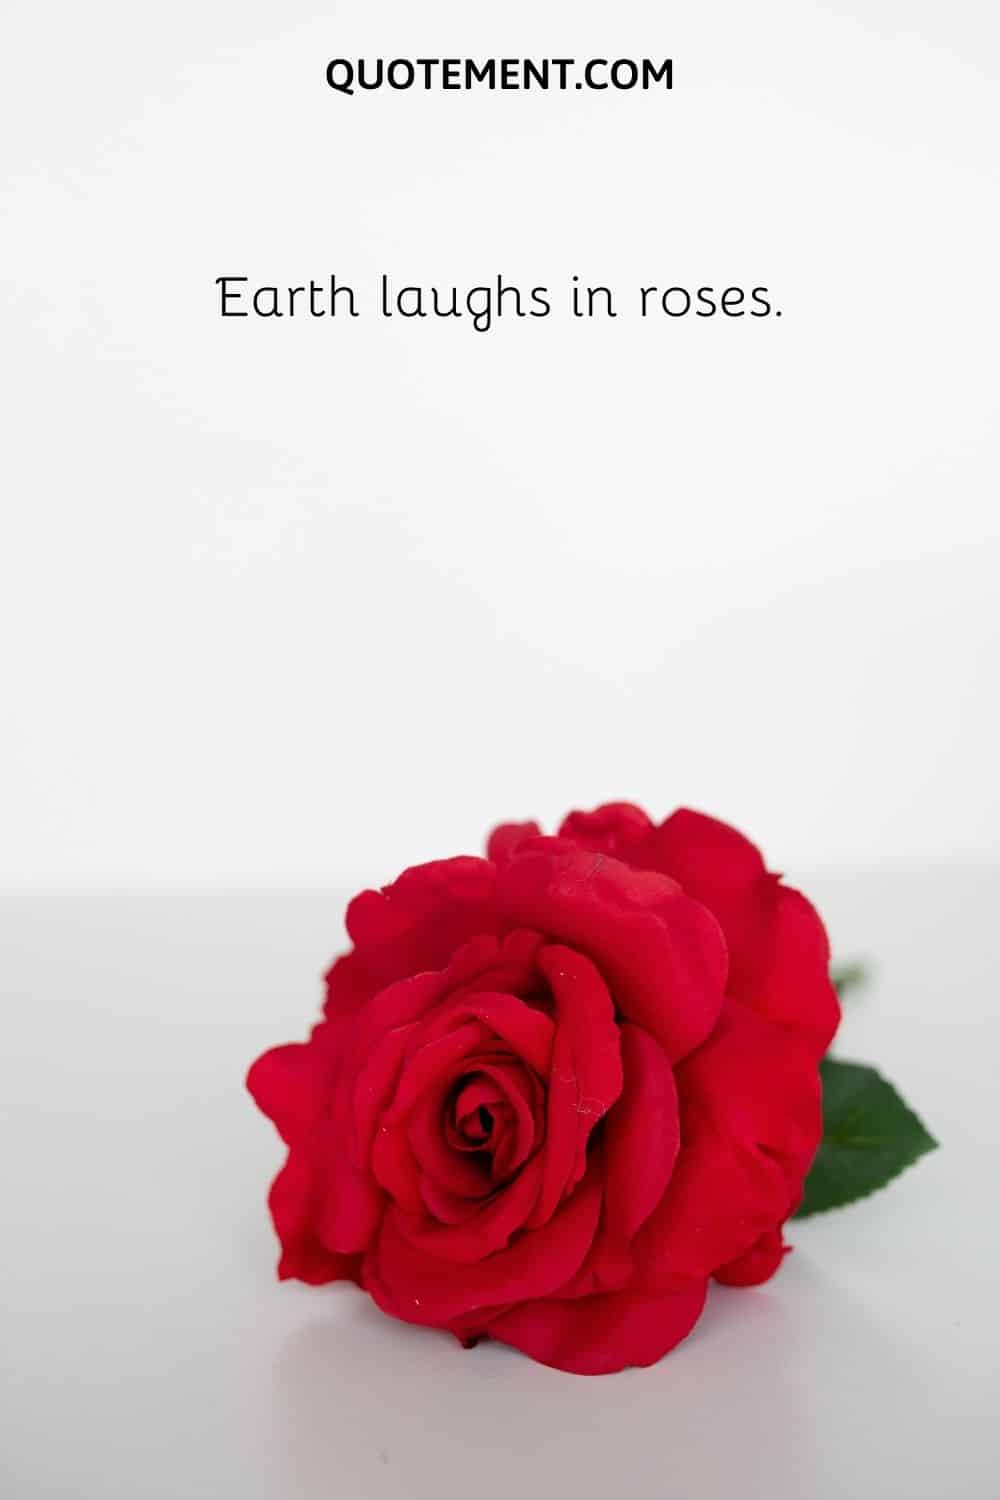 Earth laughs in roses.